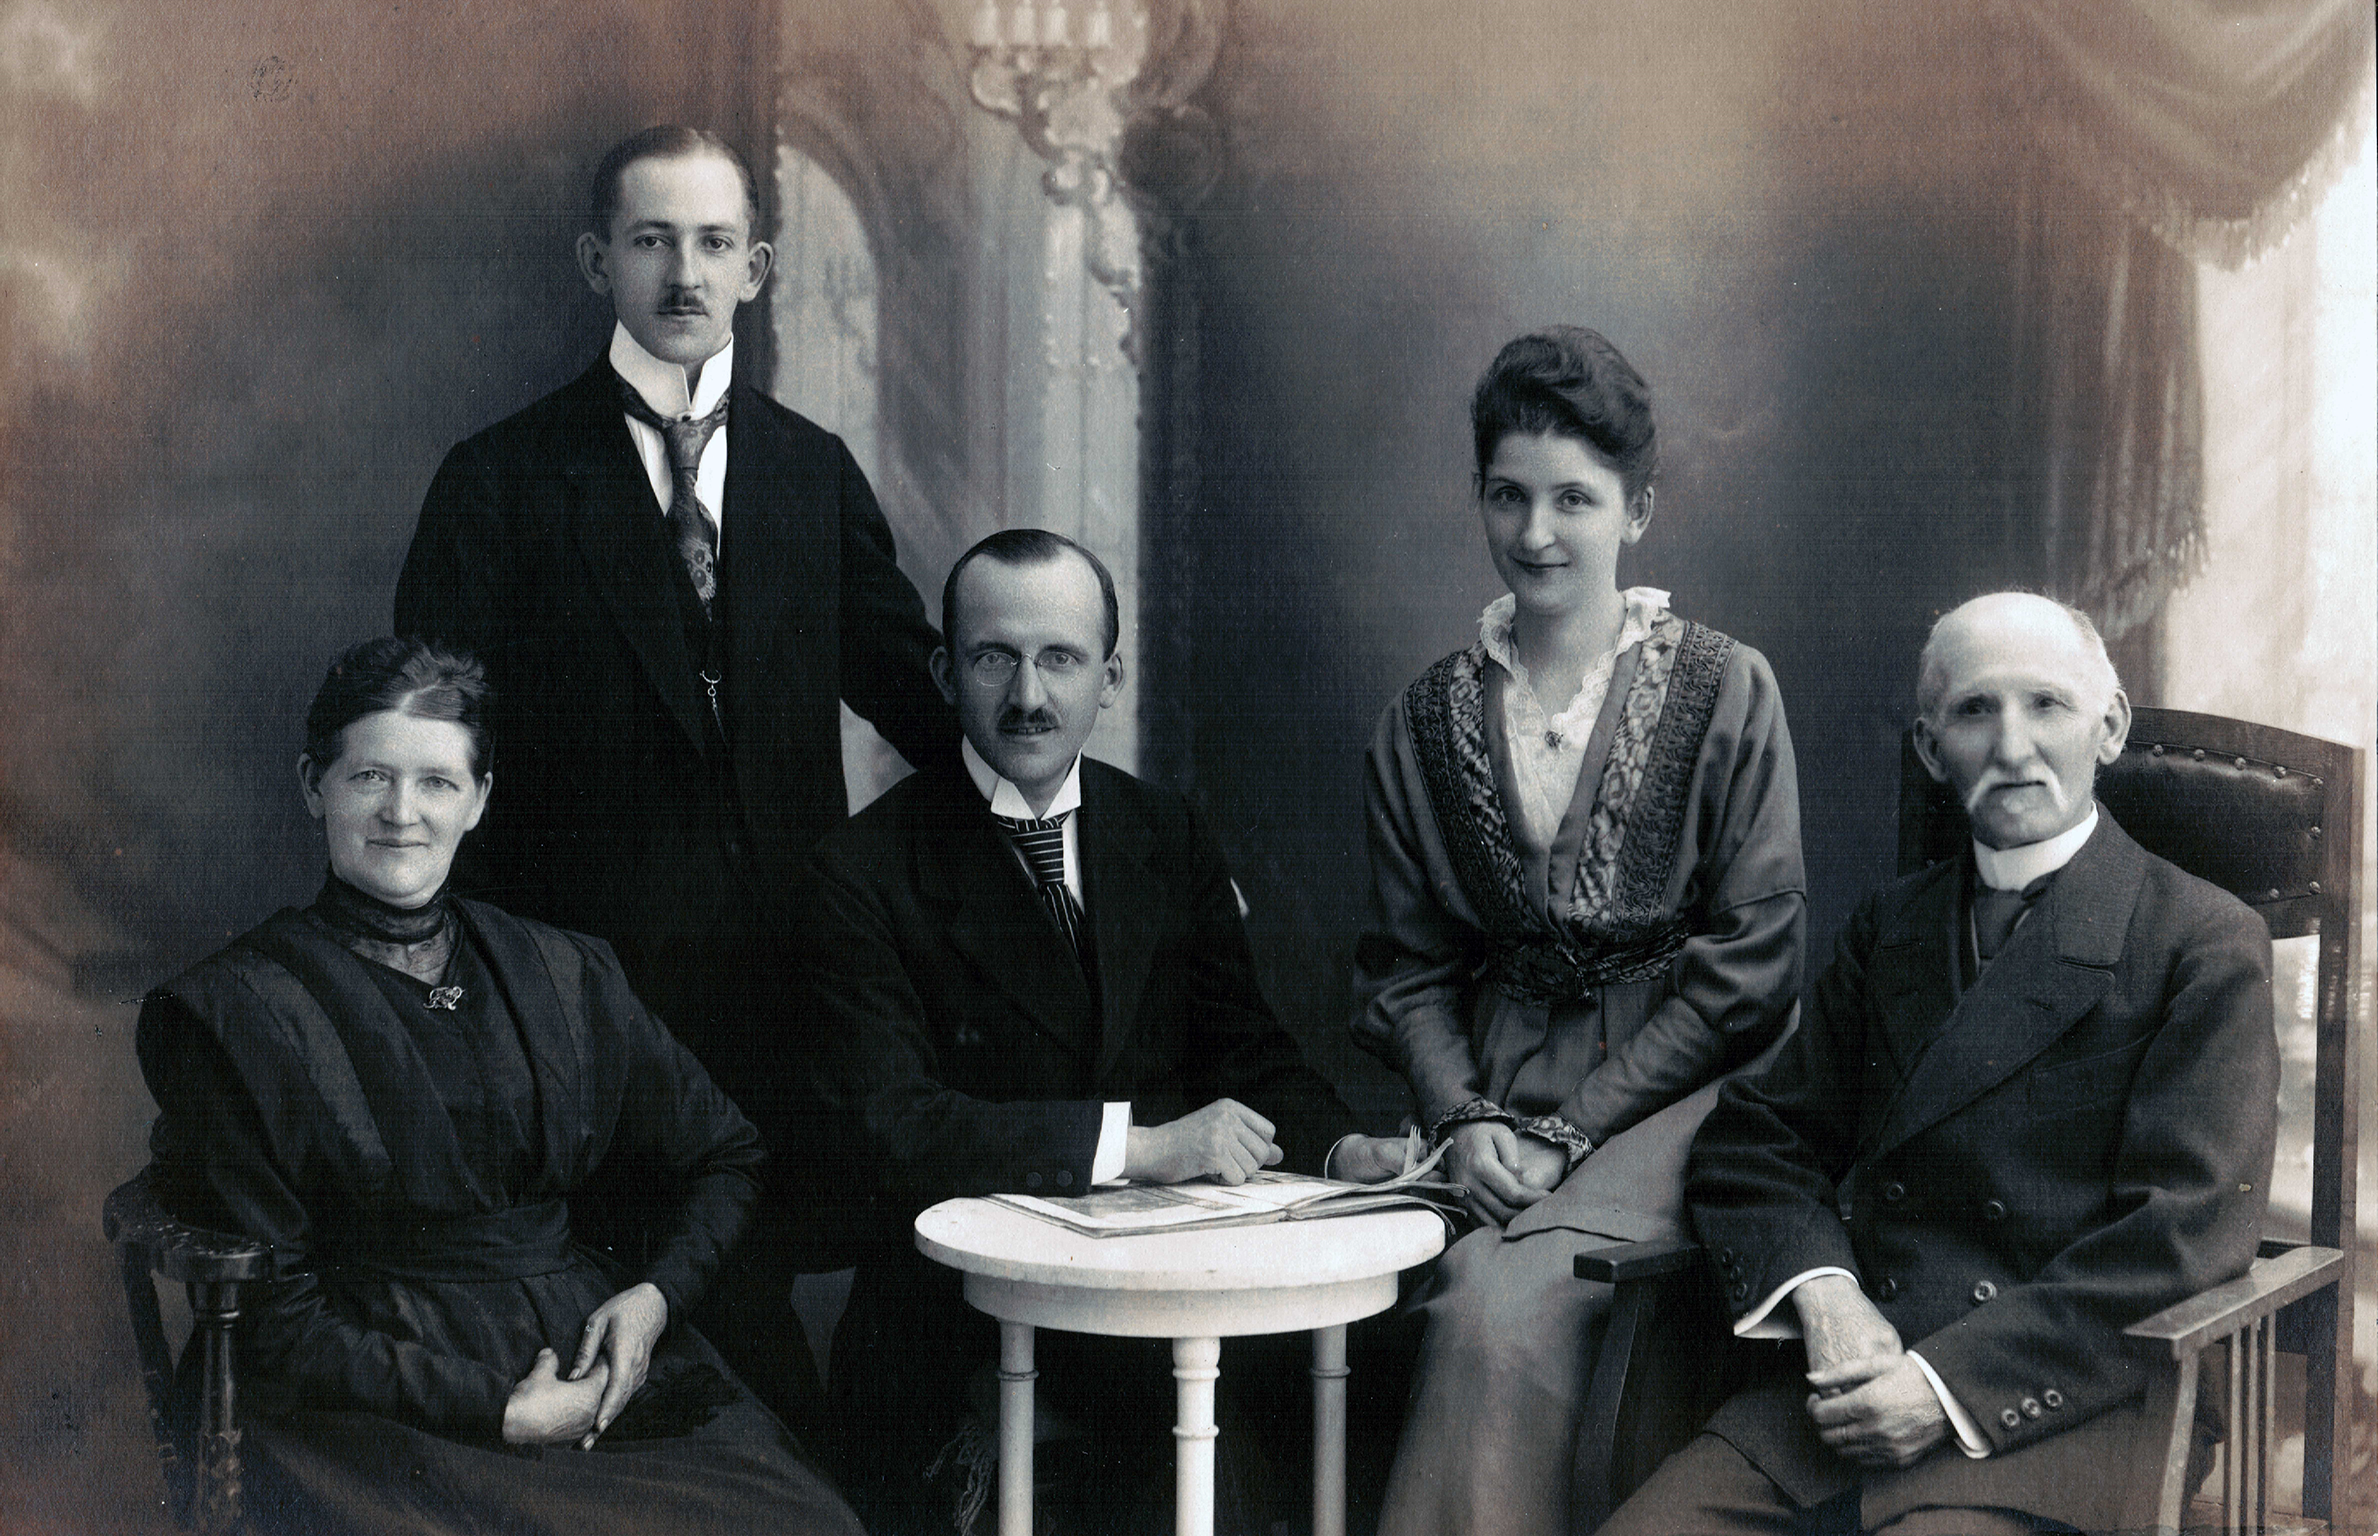 A black and white photograph with four people sitting and one standing. In the center of the photograph are Richard Listmann, Carl Listmann, and Emilie Rau. Their mother is to the left and to the right is their father.